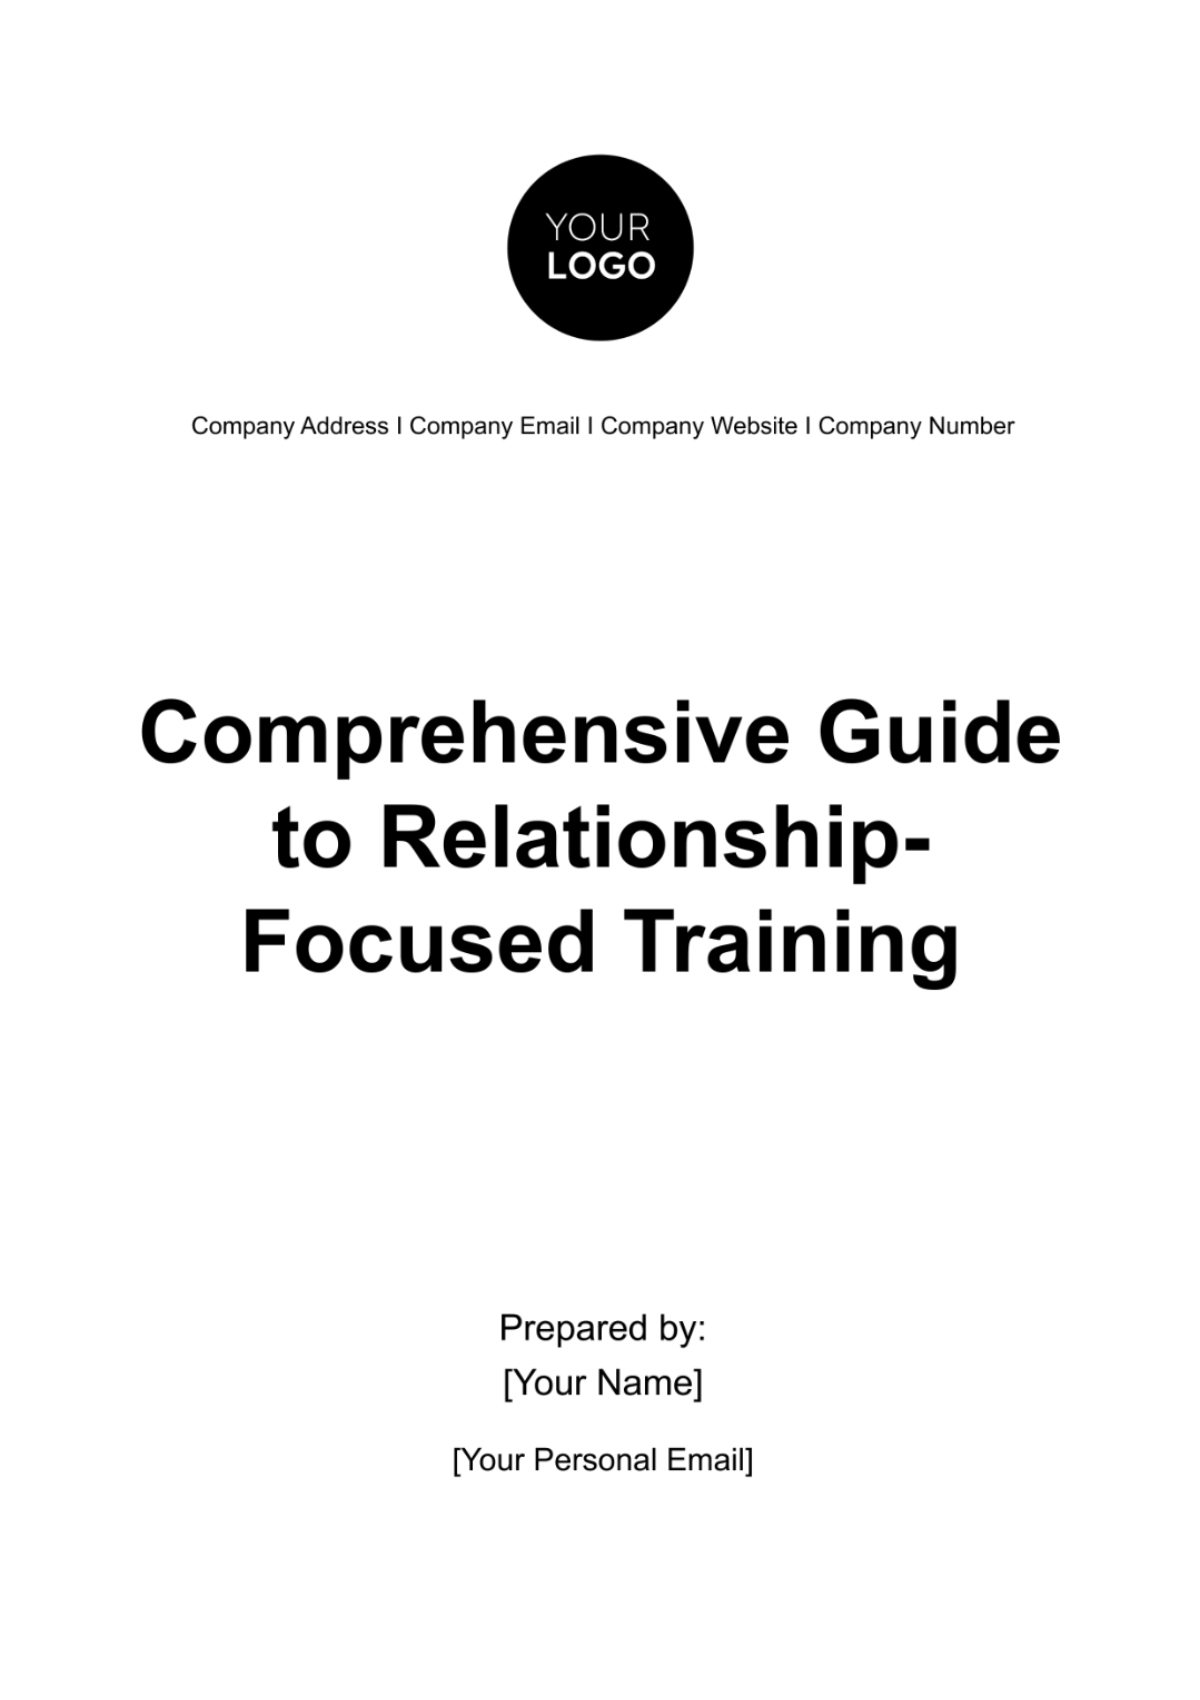 Free Comprehensive Guide to Relationship-focused Training HR Template